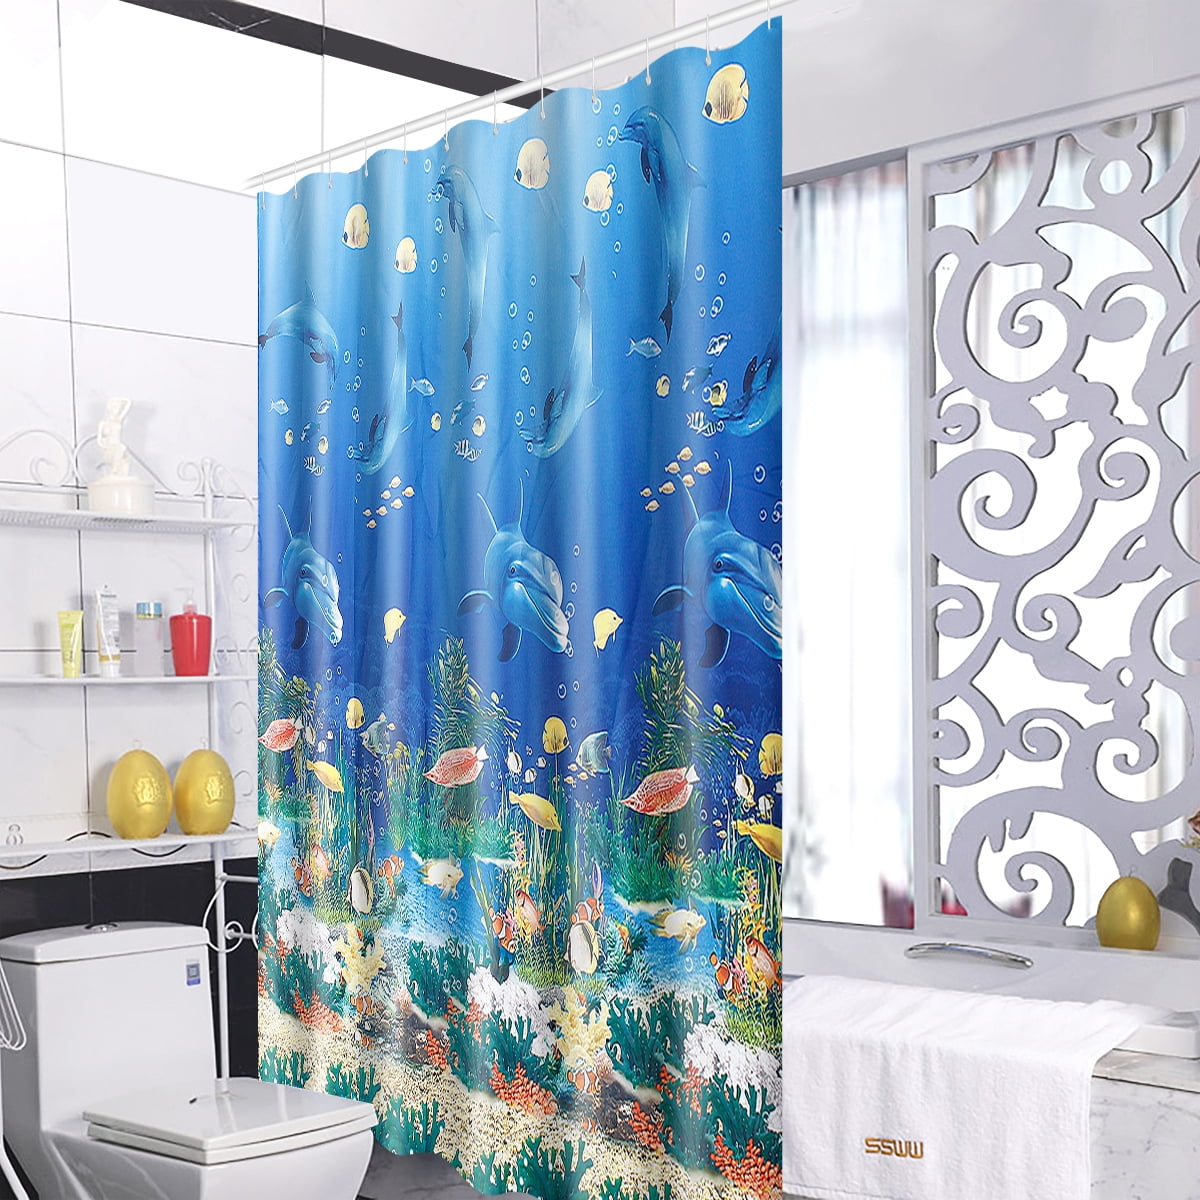 71''x71'' Dolphin Shower Curtain,Waterproof Polyester Ocean Themed